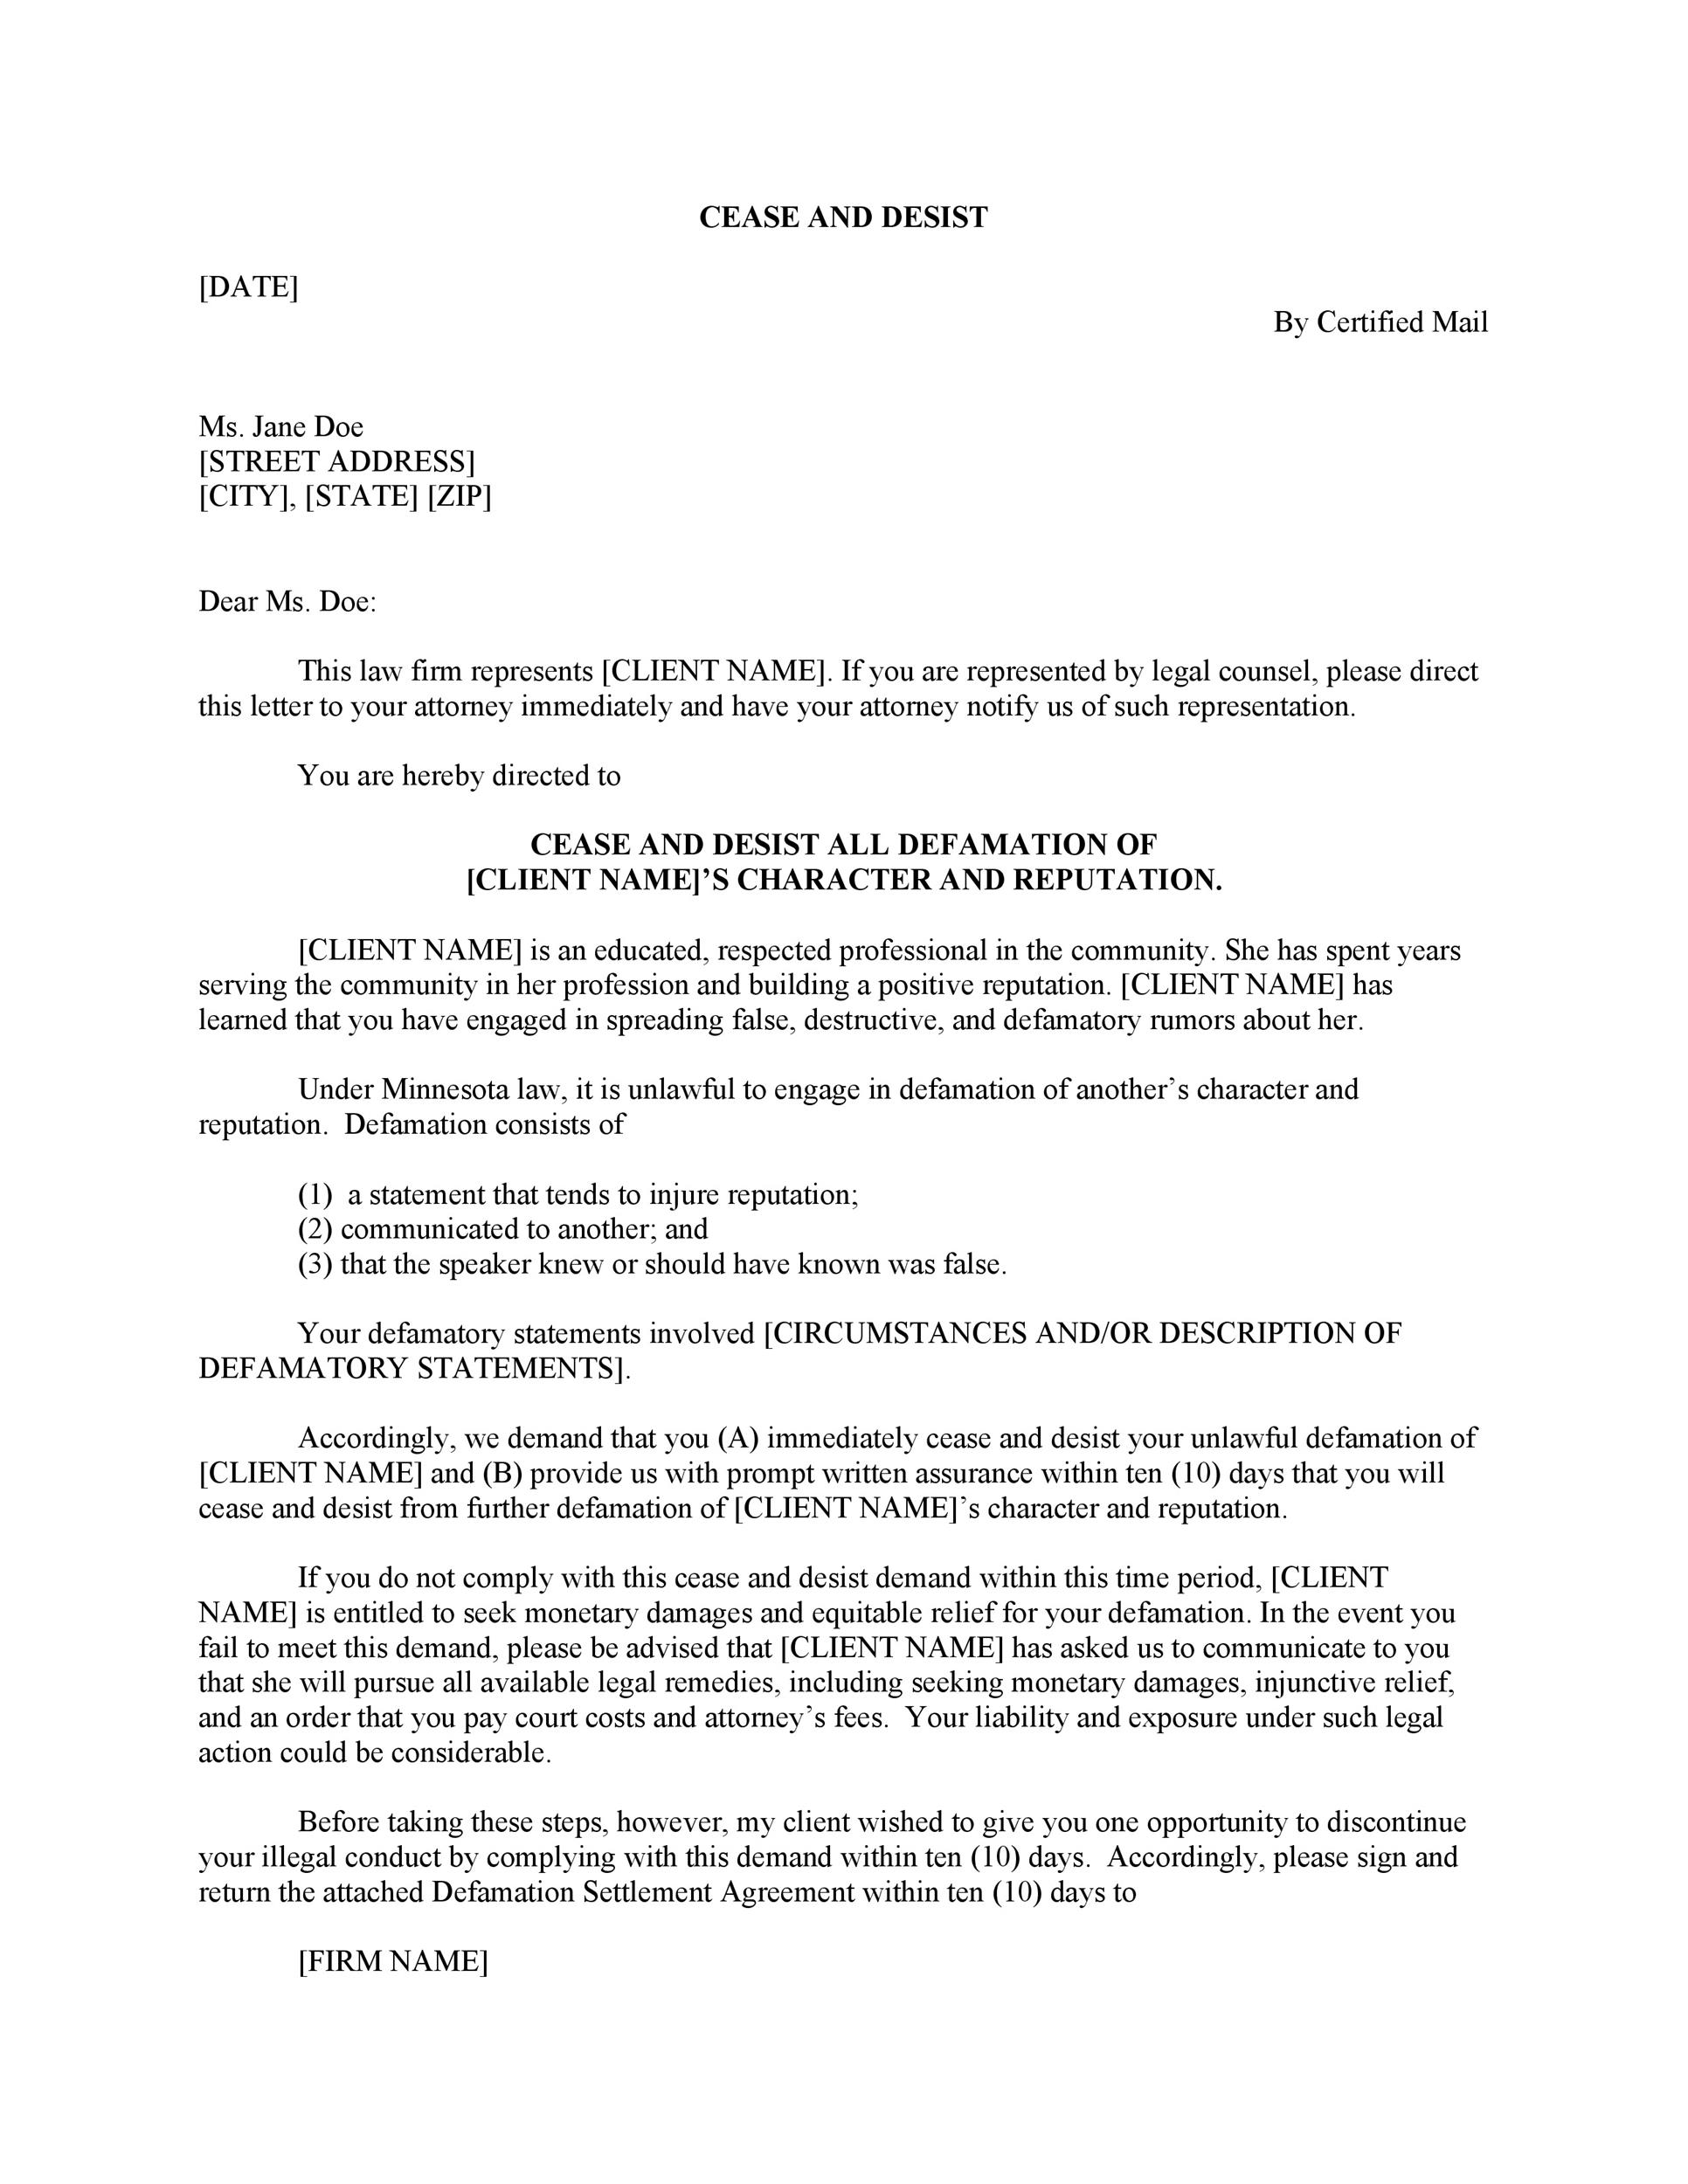 Example Of A Cease And Desist Letter For Your Needs | Letter Template